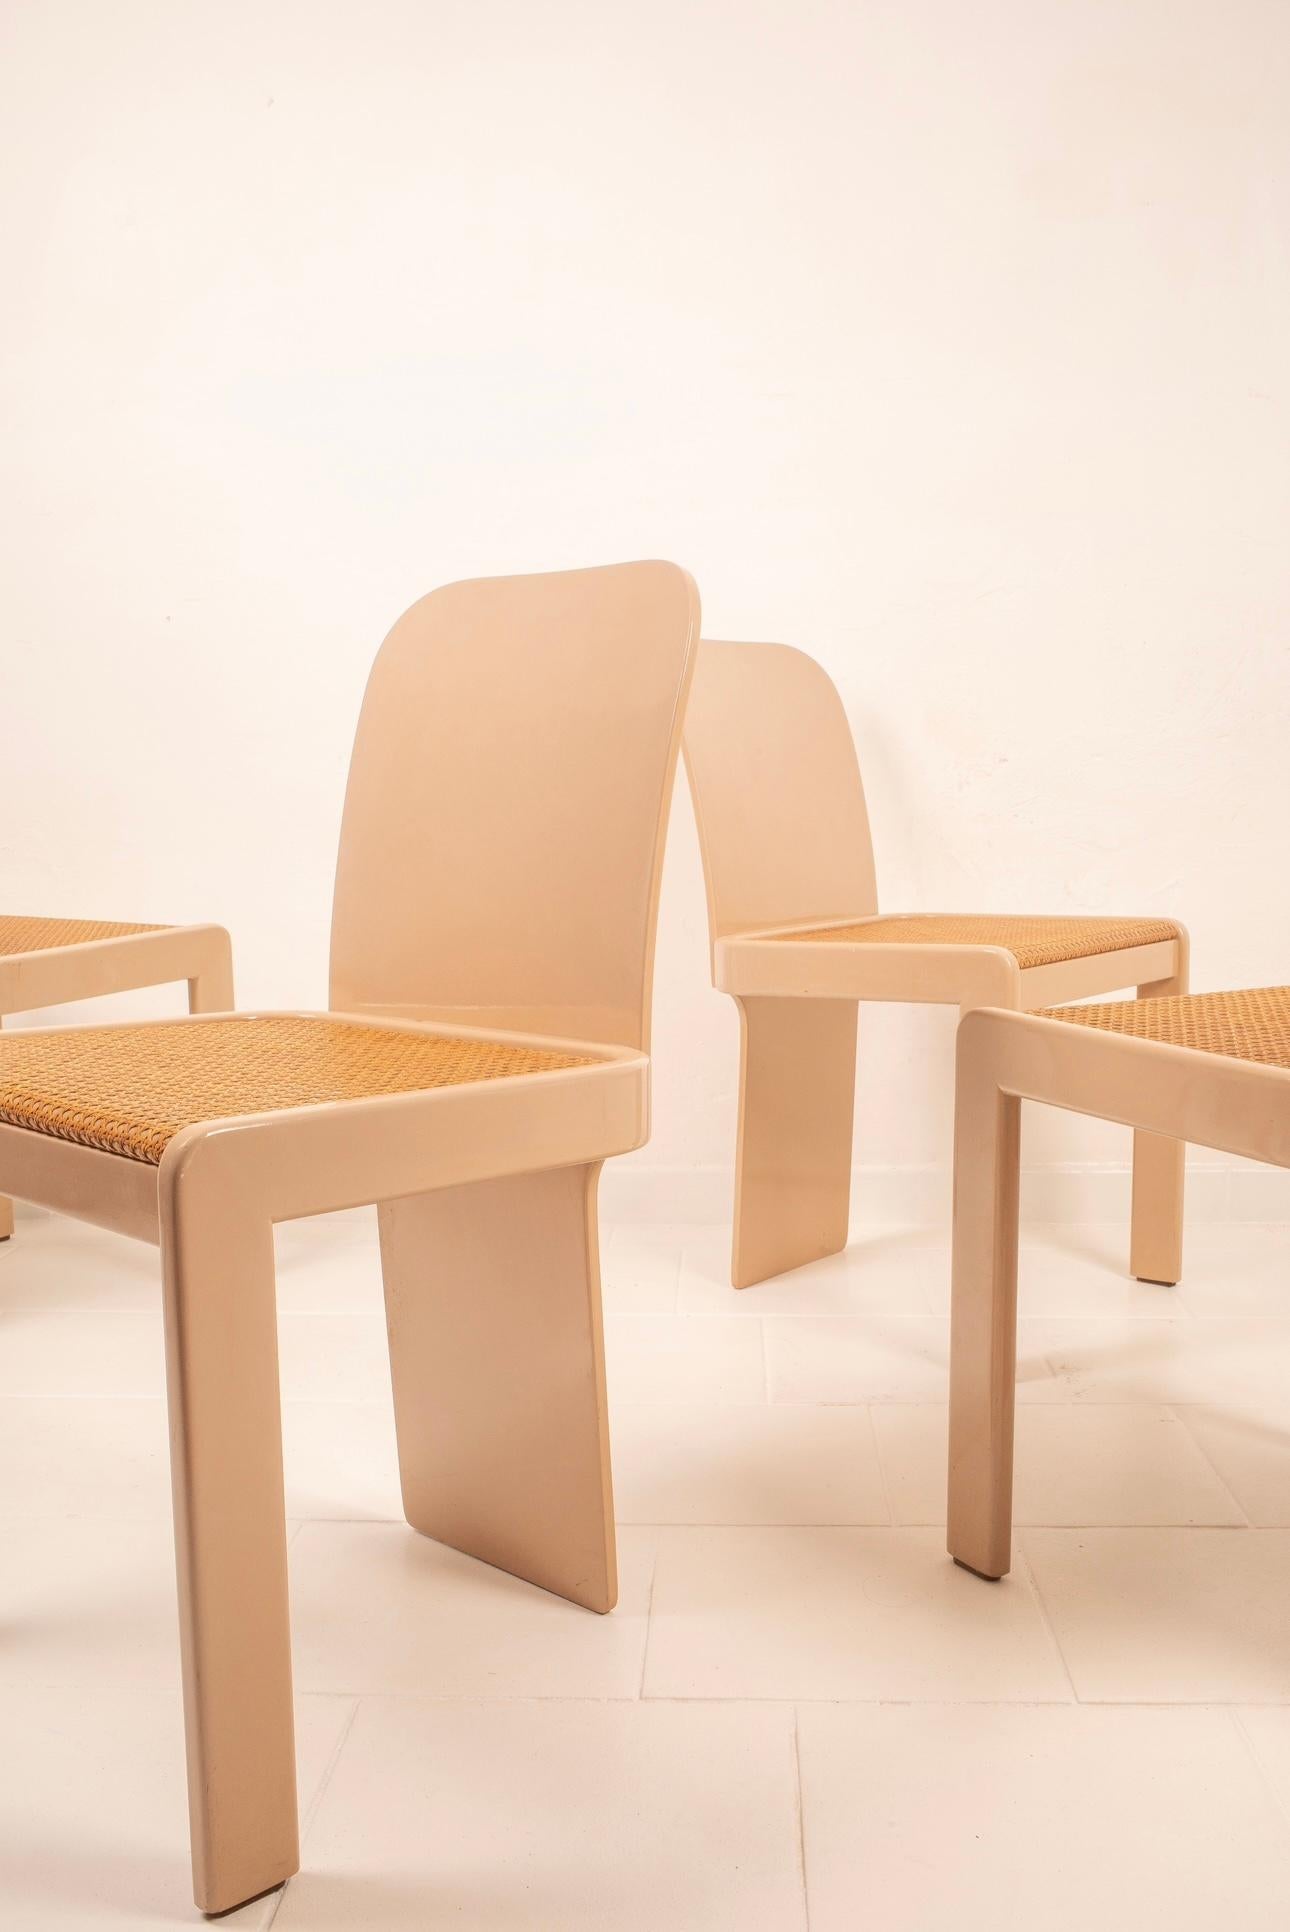 Set of 4 Chairs by Pierluigi Molinari for Pozzi For Sale 7